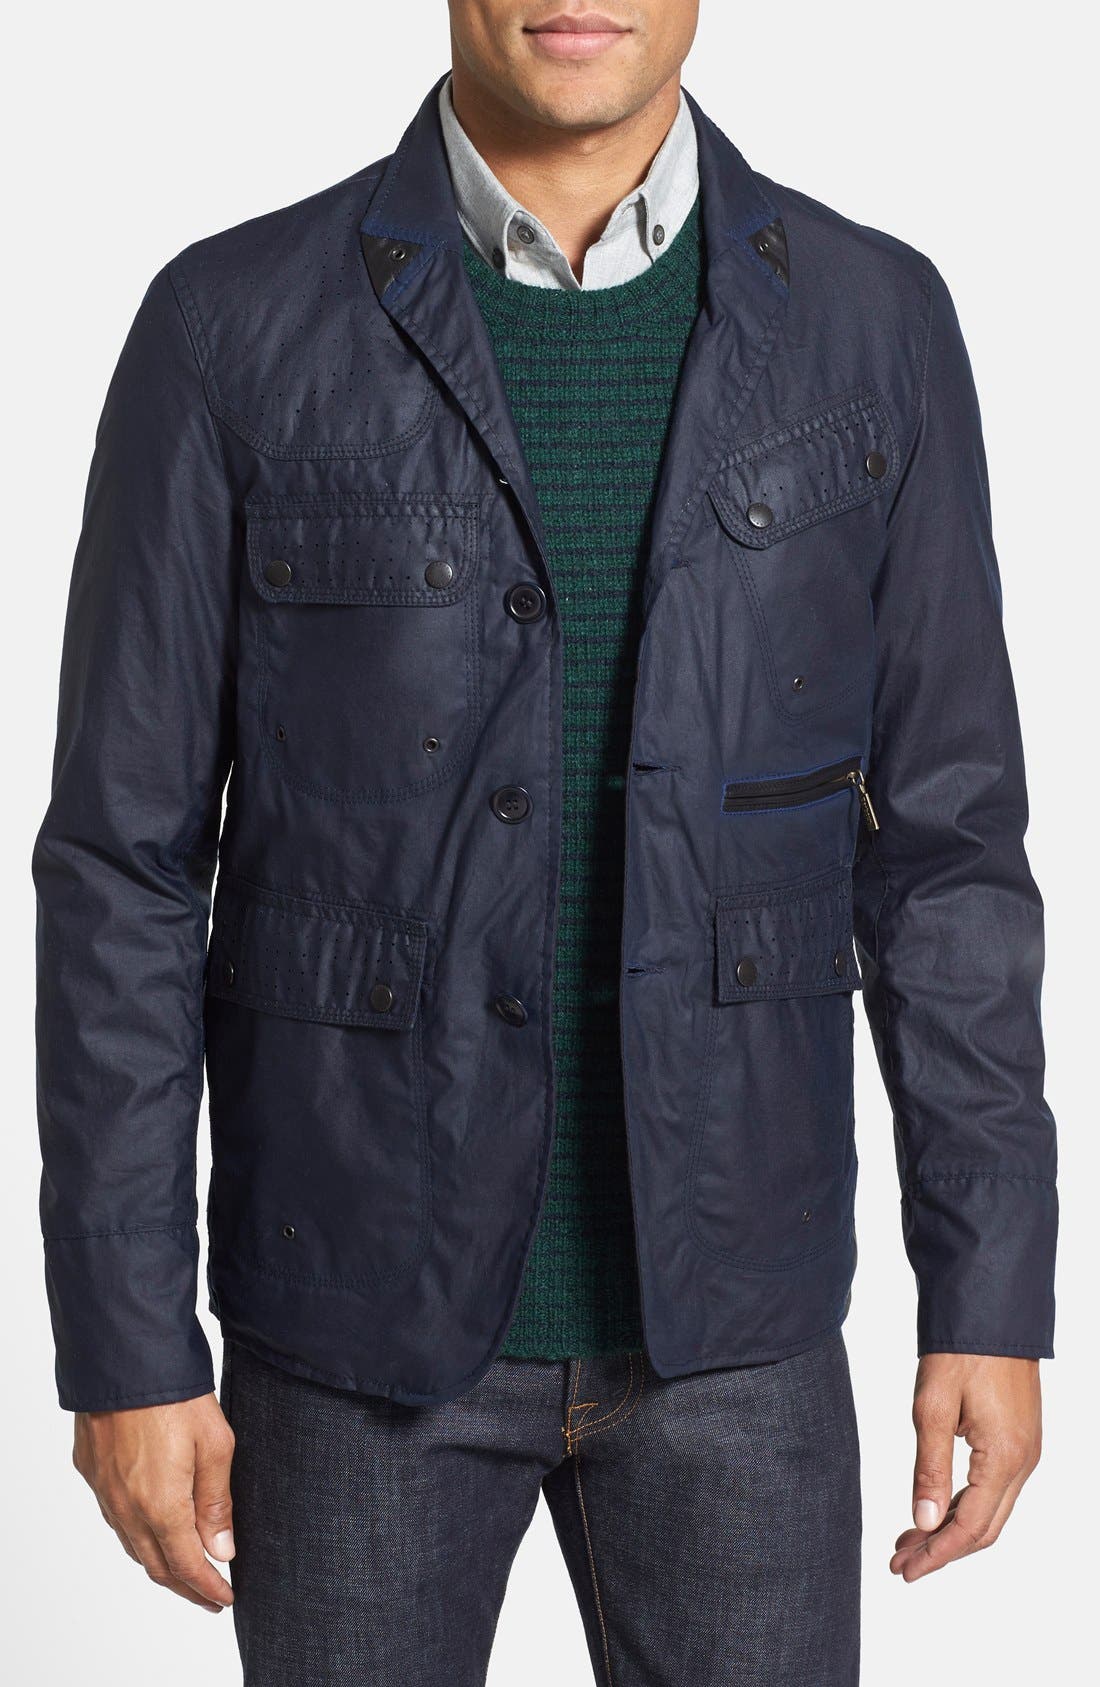 barbour white mountaineering jacket